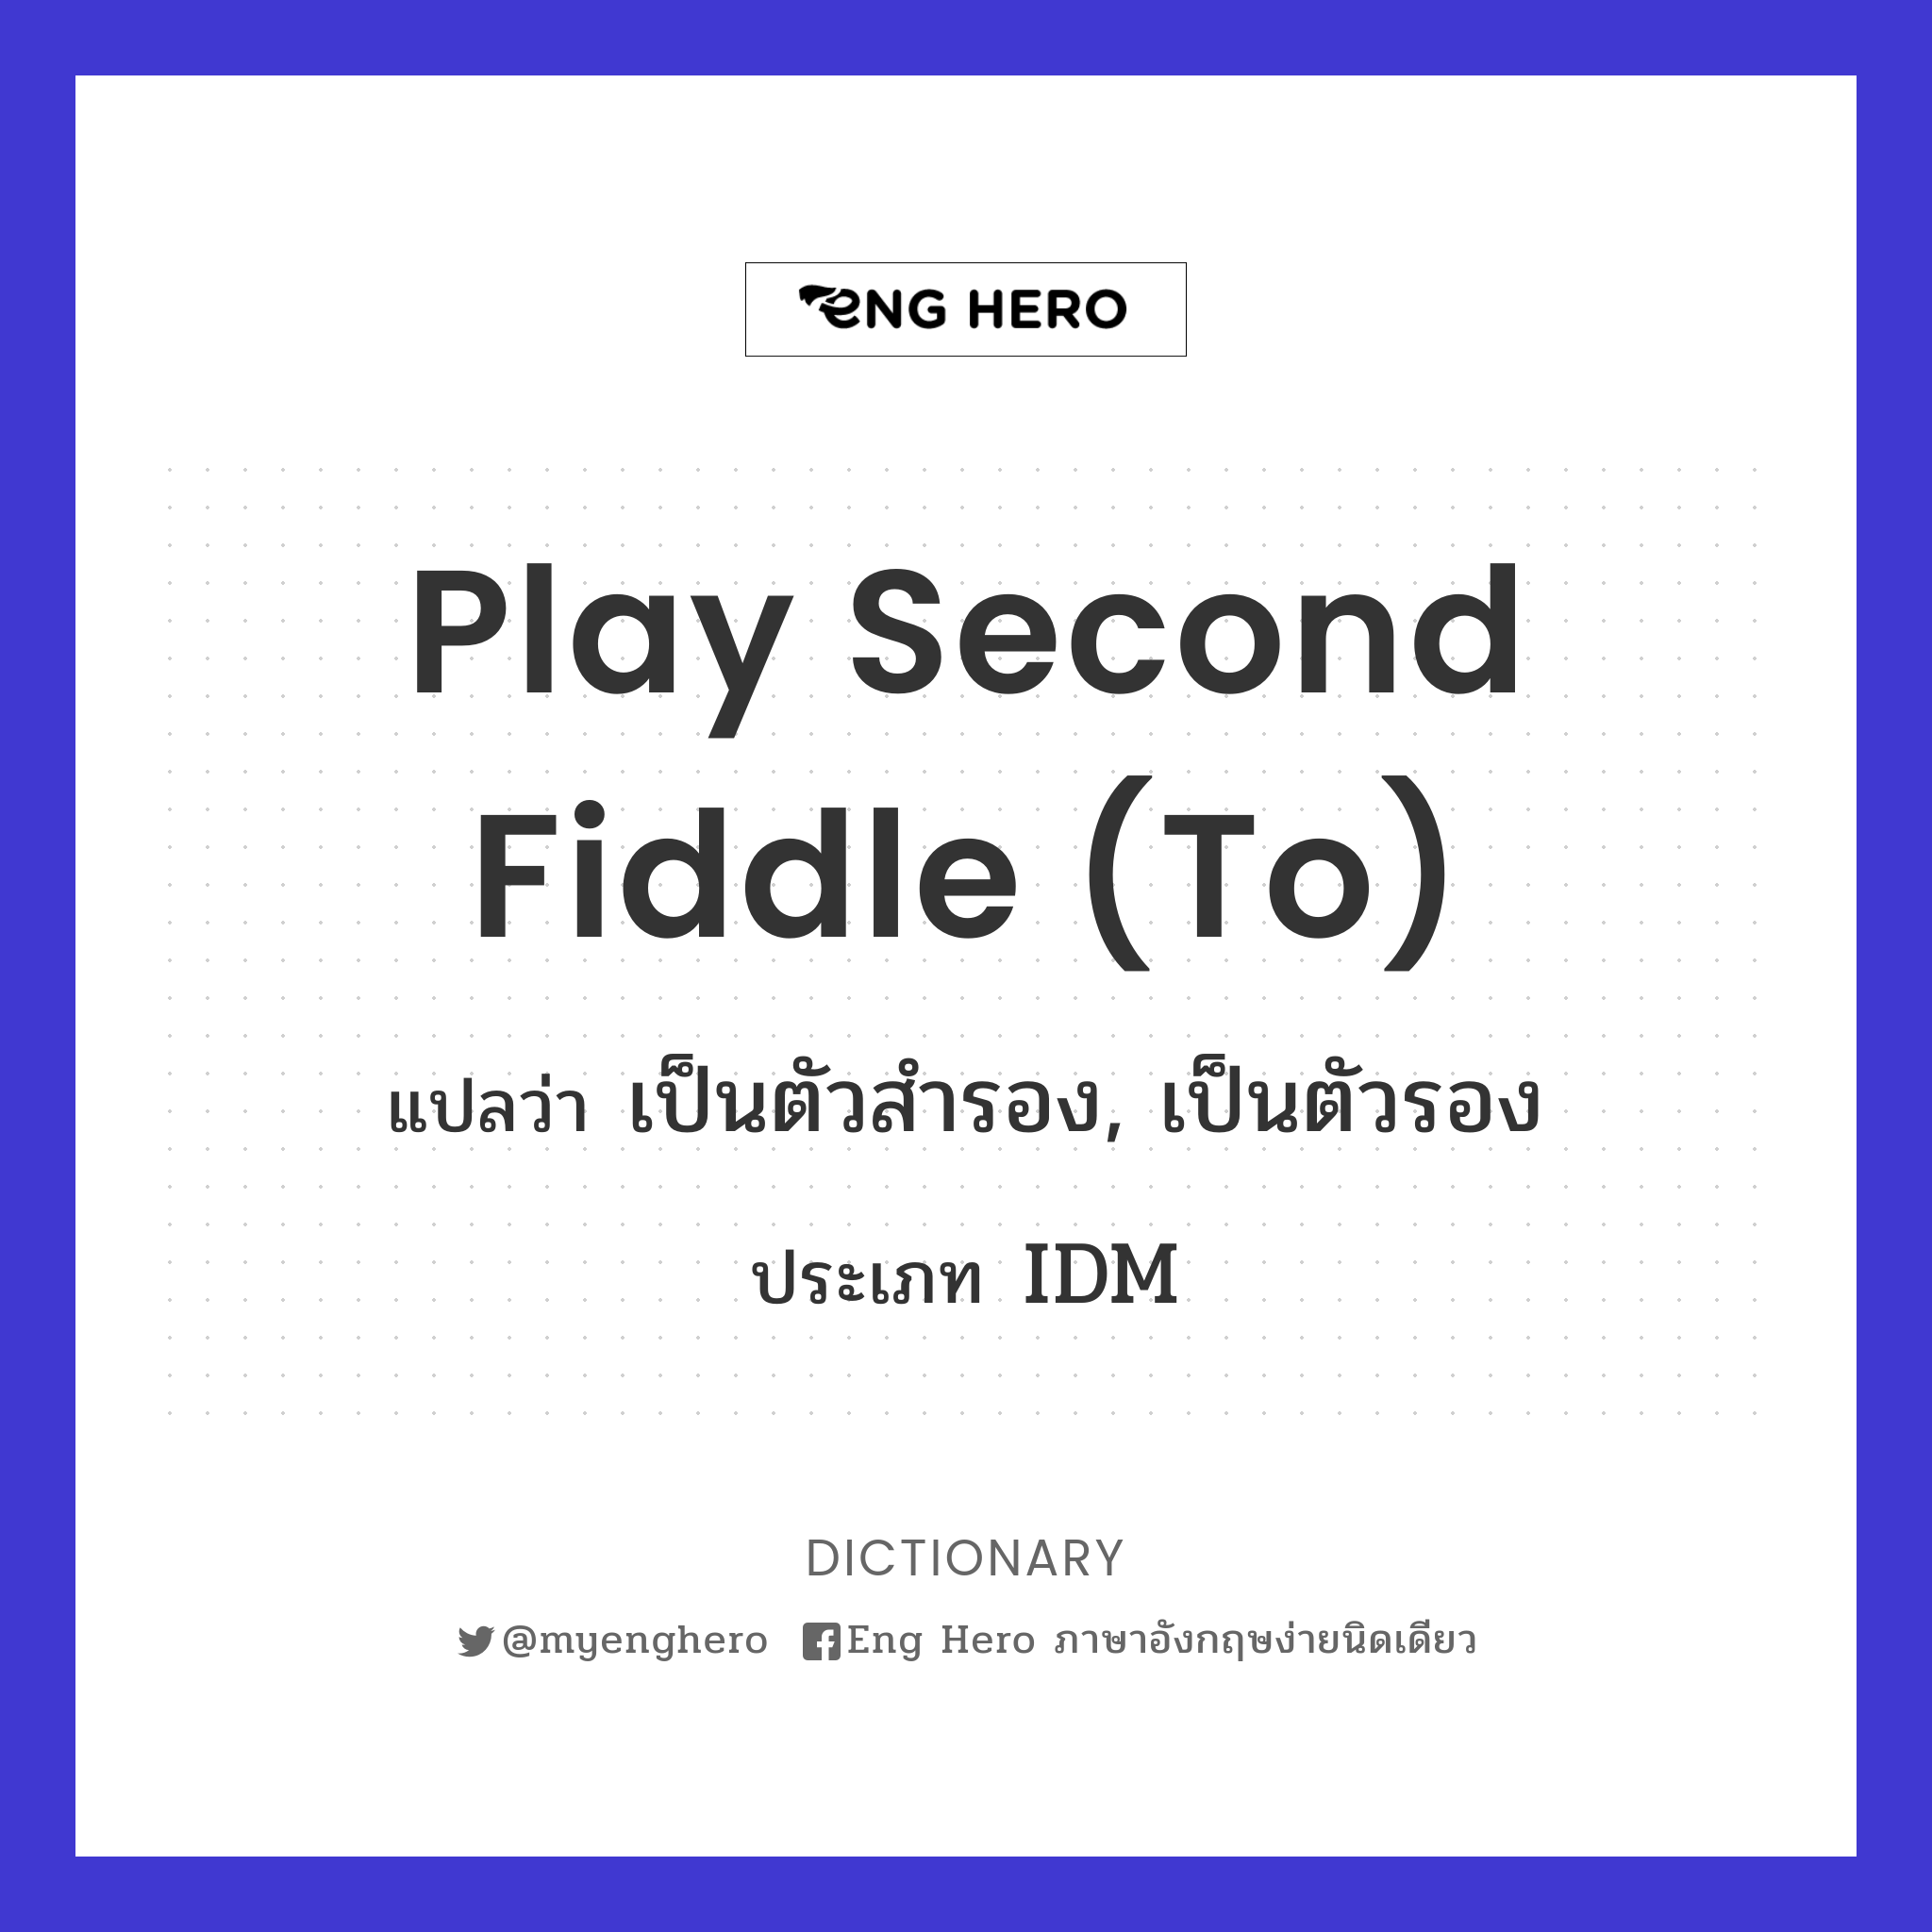 play second fiddle (to)